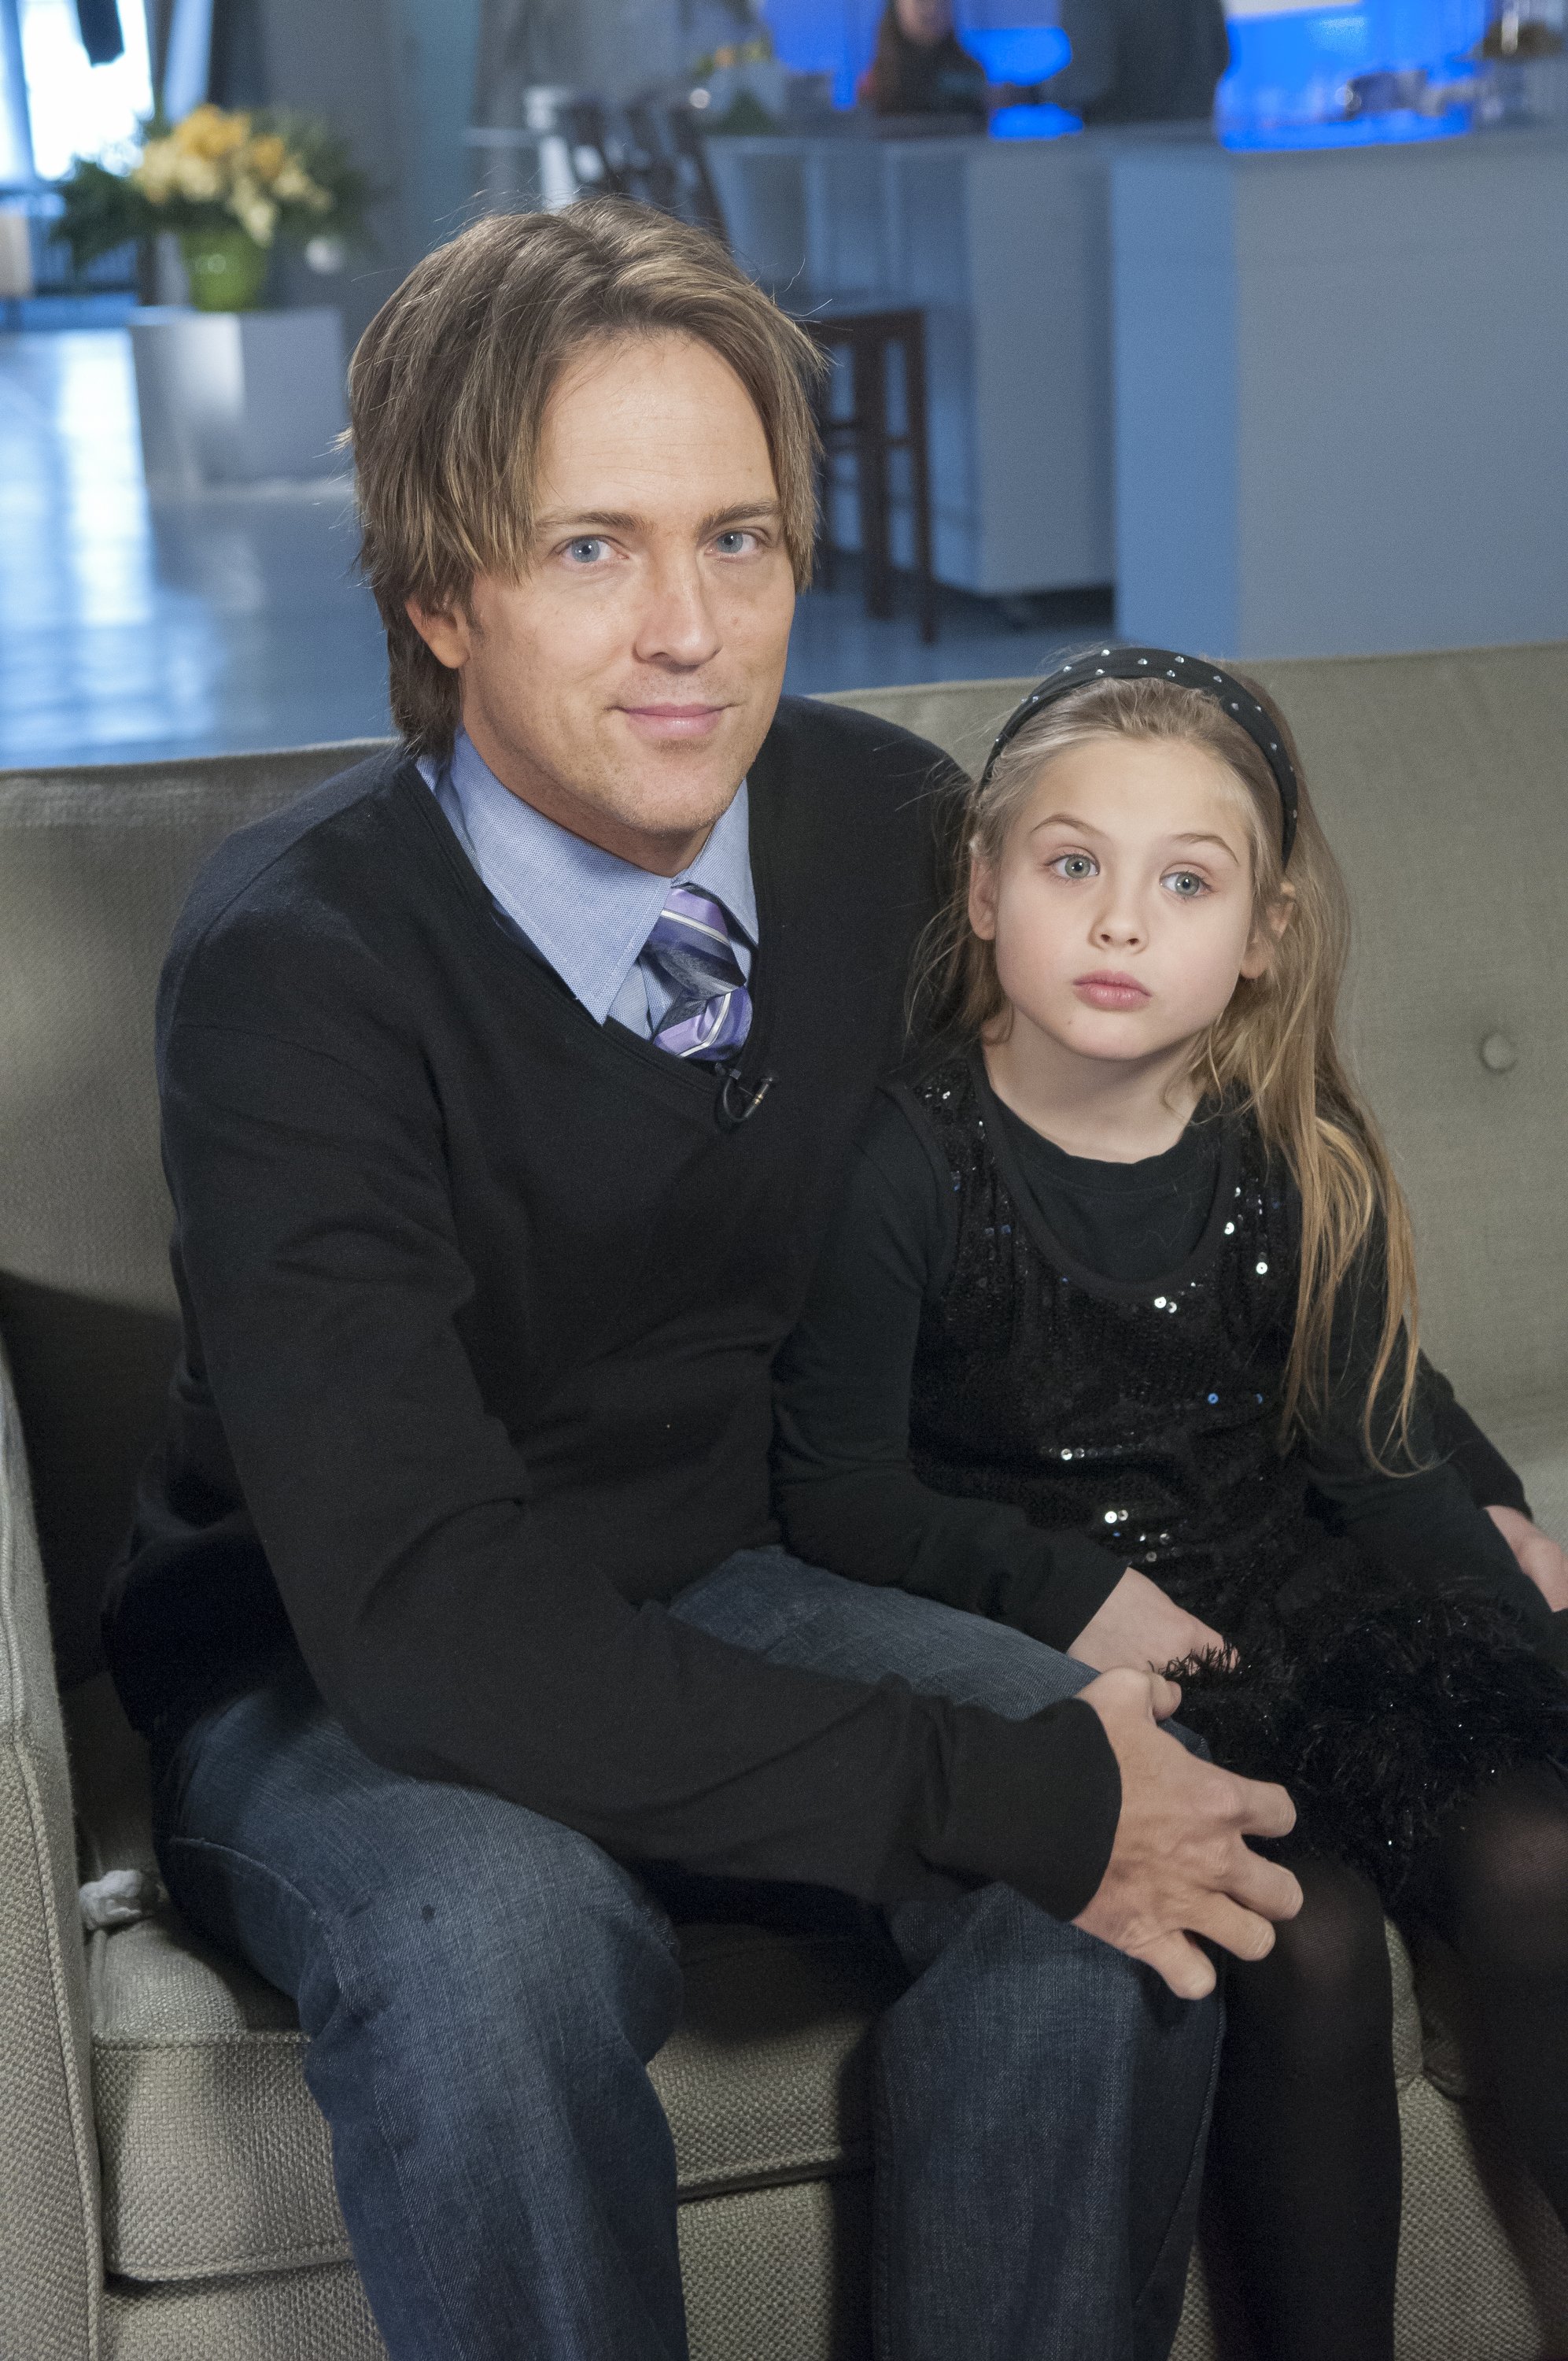 Larry and Dannielynn Birkhead on ABC's "20/20" on January 19, 2013. | Source: Getty Images